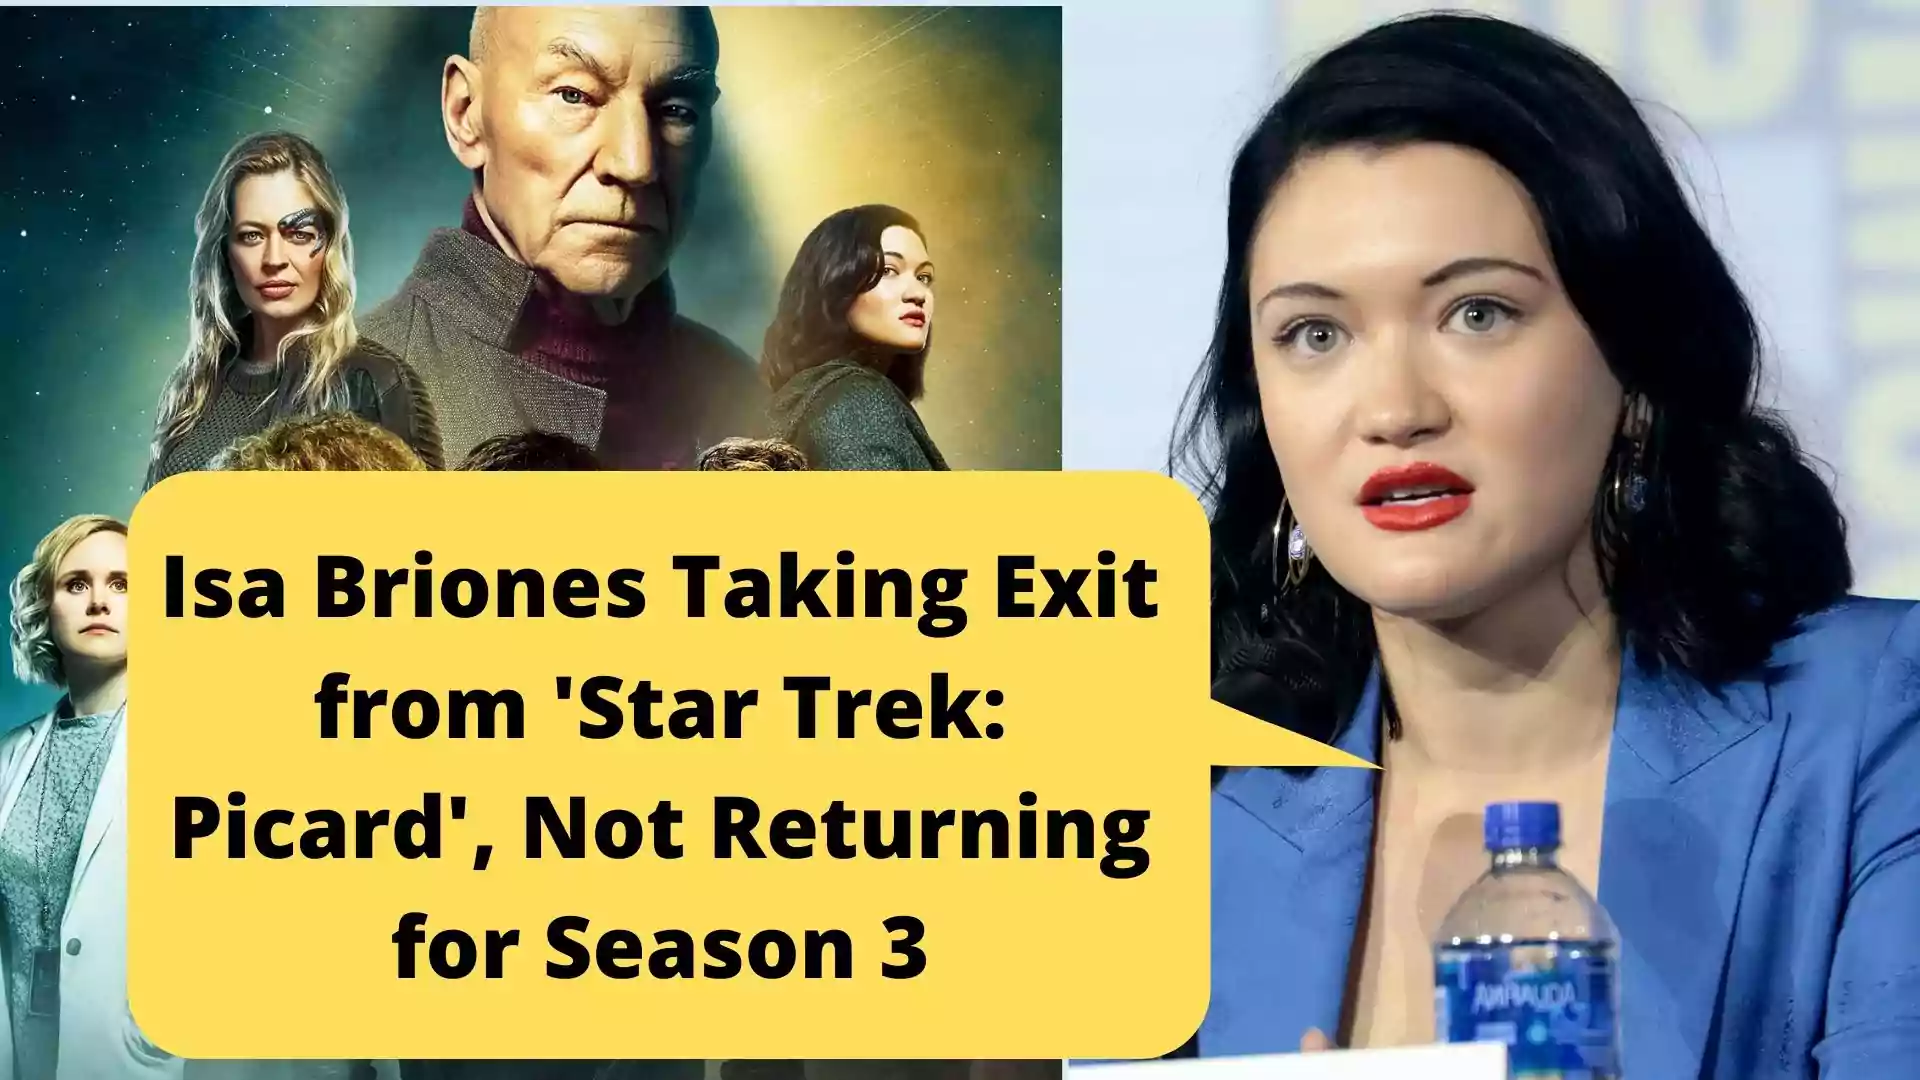 Isa Briones Taking Exit from 'Star Trek: Picard', Not Returning for Season 3